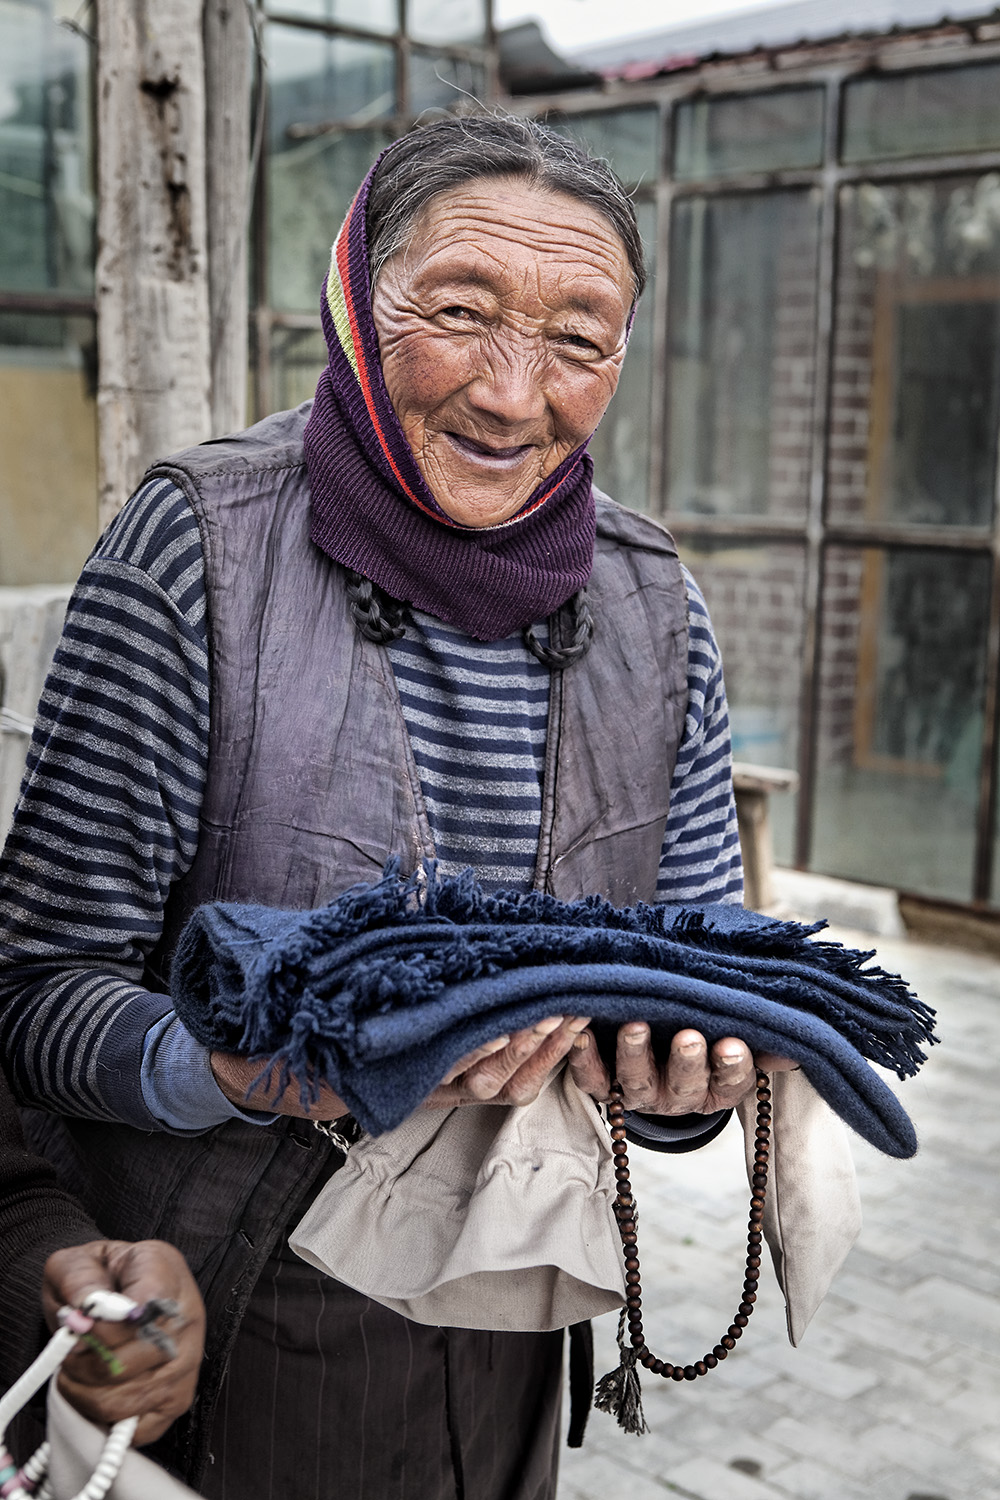  All over 80 year olds in the village of Ritoma, Amdo, Tibet, receive a new scarf for Sagadawa from Norlha Textiles. 